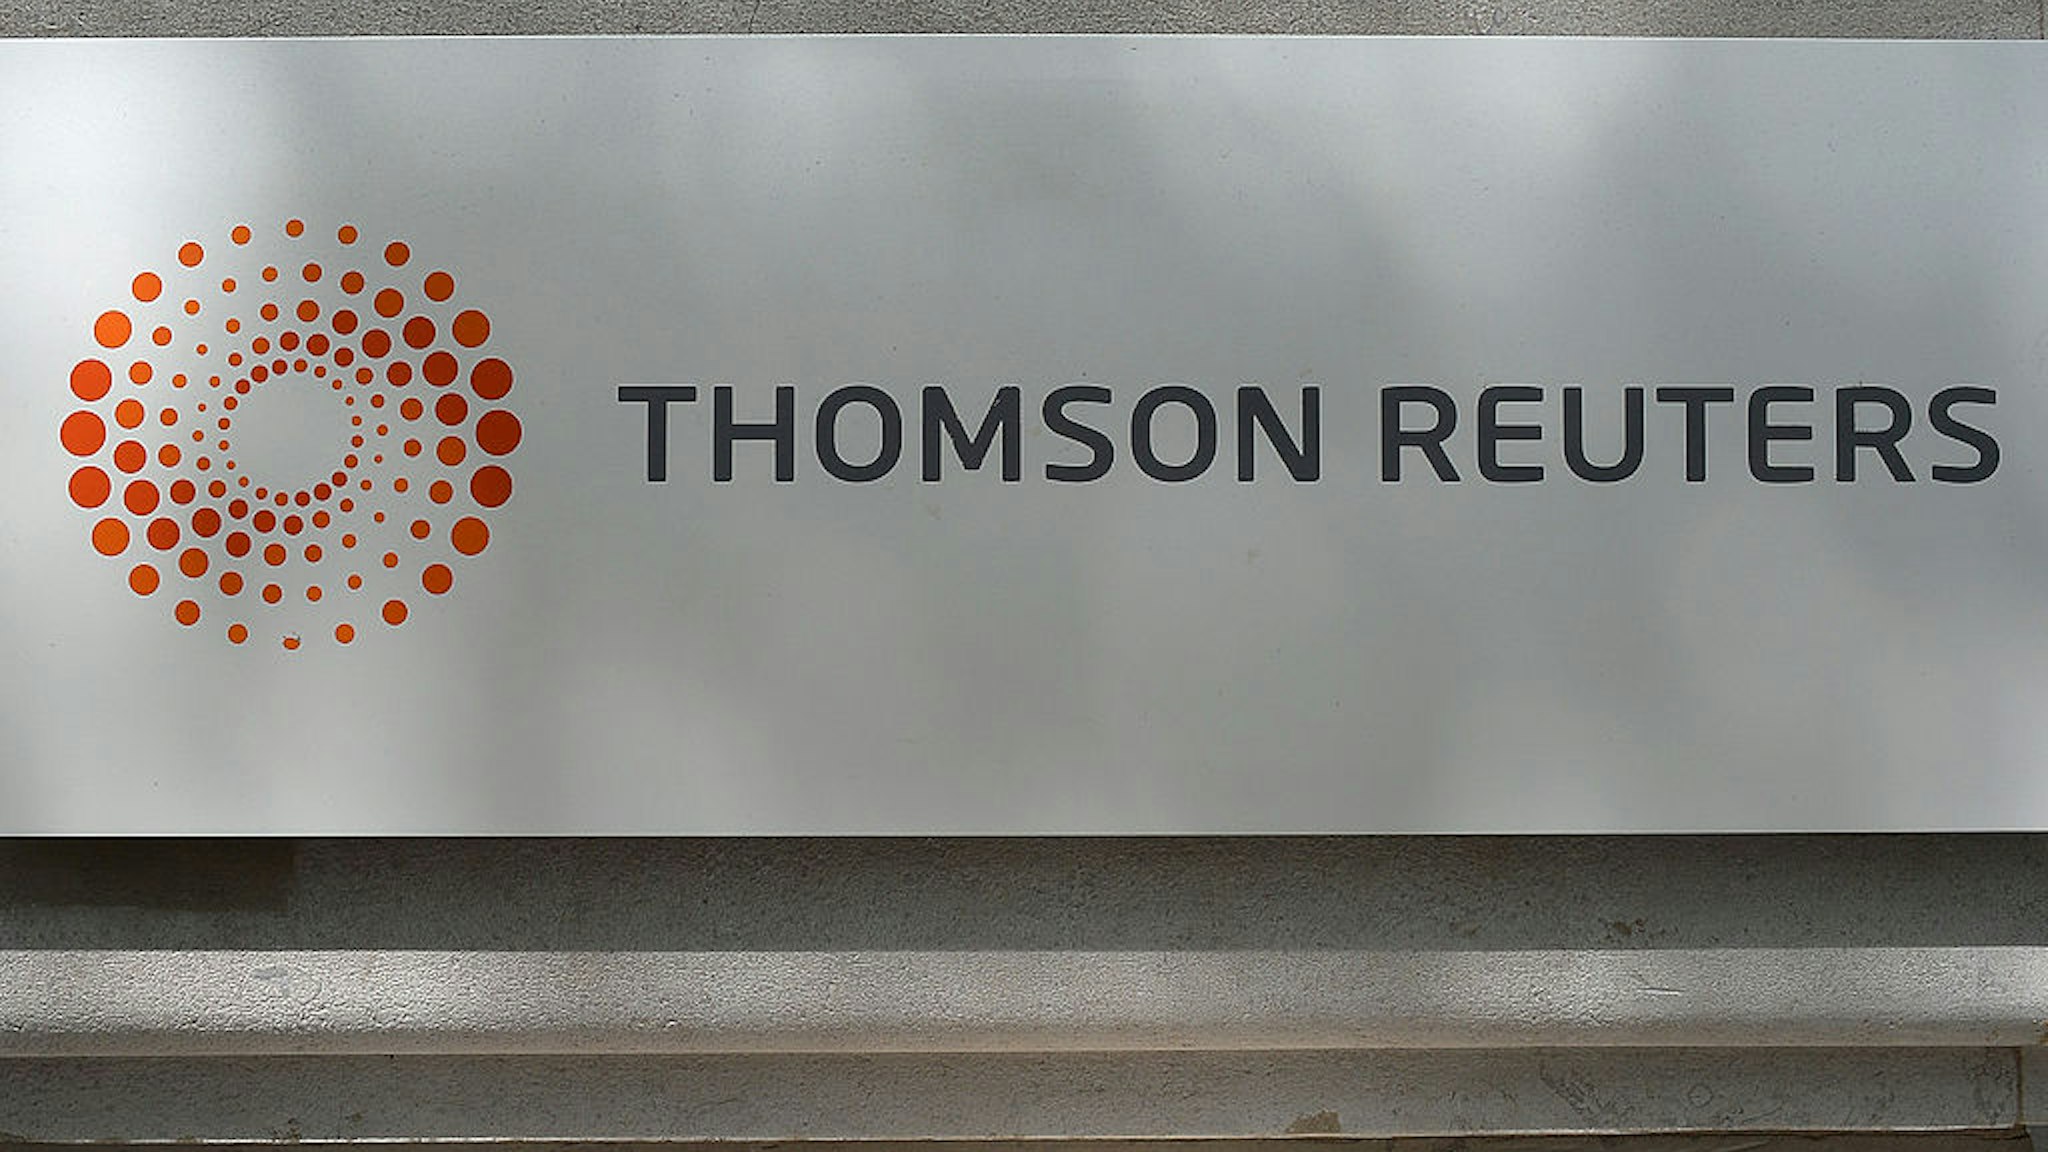 The corporate logo of Thomson Reuters is pictured on May 5, 2014 in Paris, France.